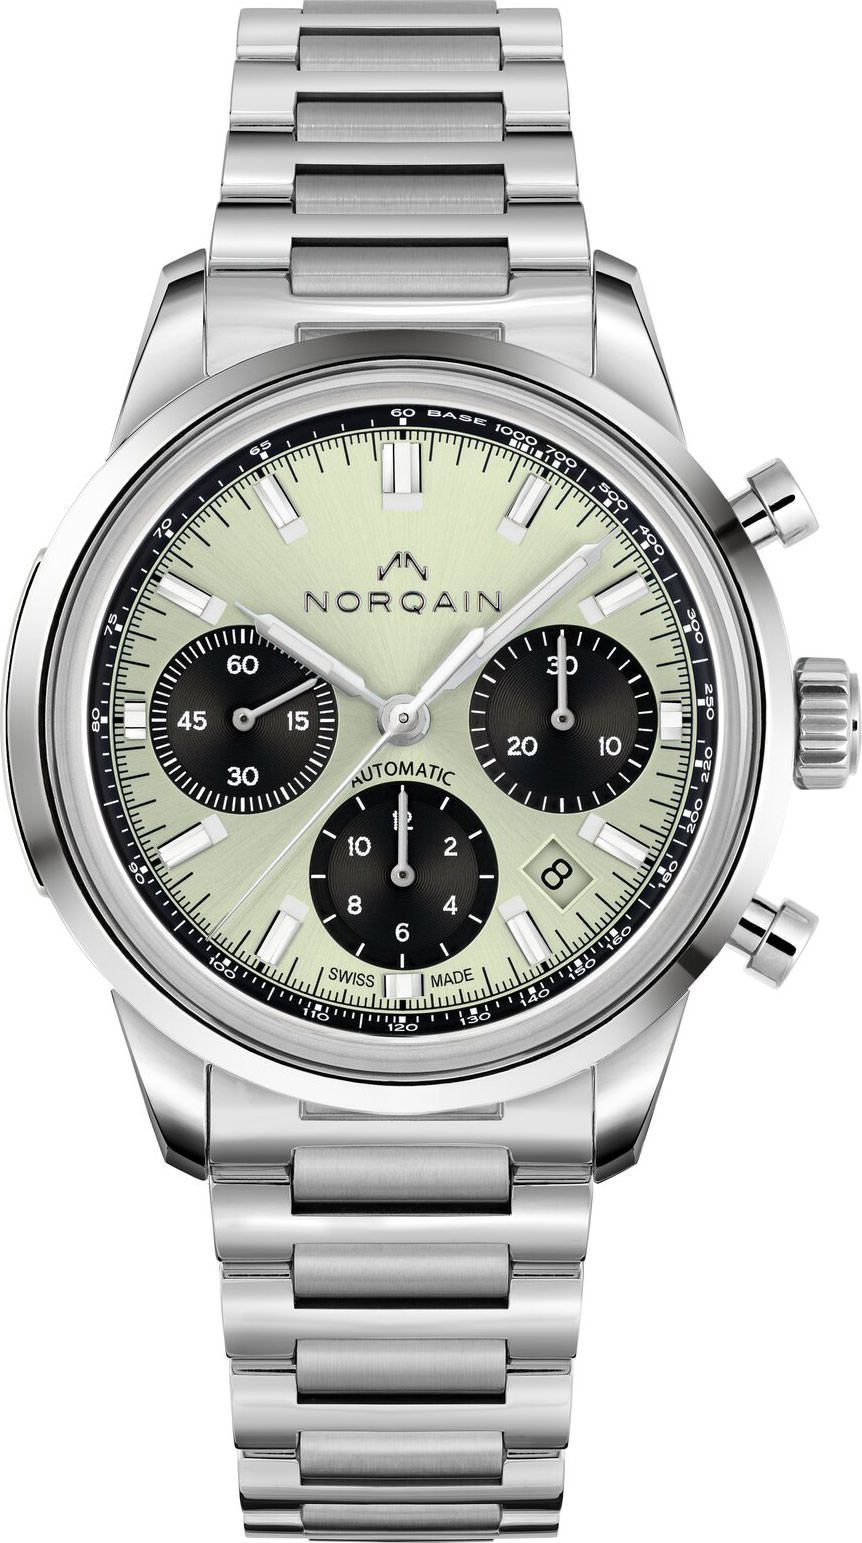 NORQAIN Freedom Freedom 60 Chrono Green Dial 40 mm Automatic Watch For Unisex - 1